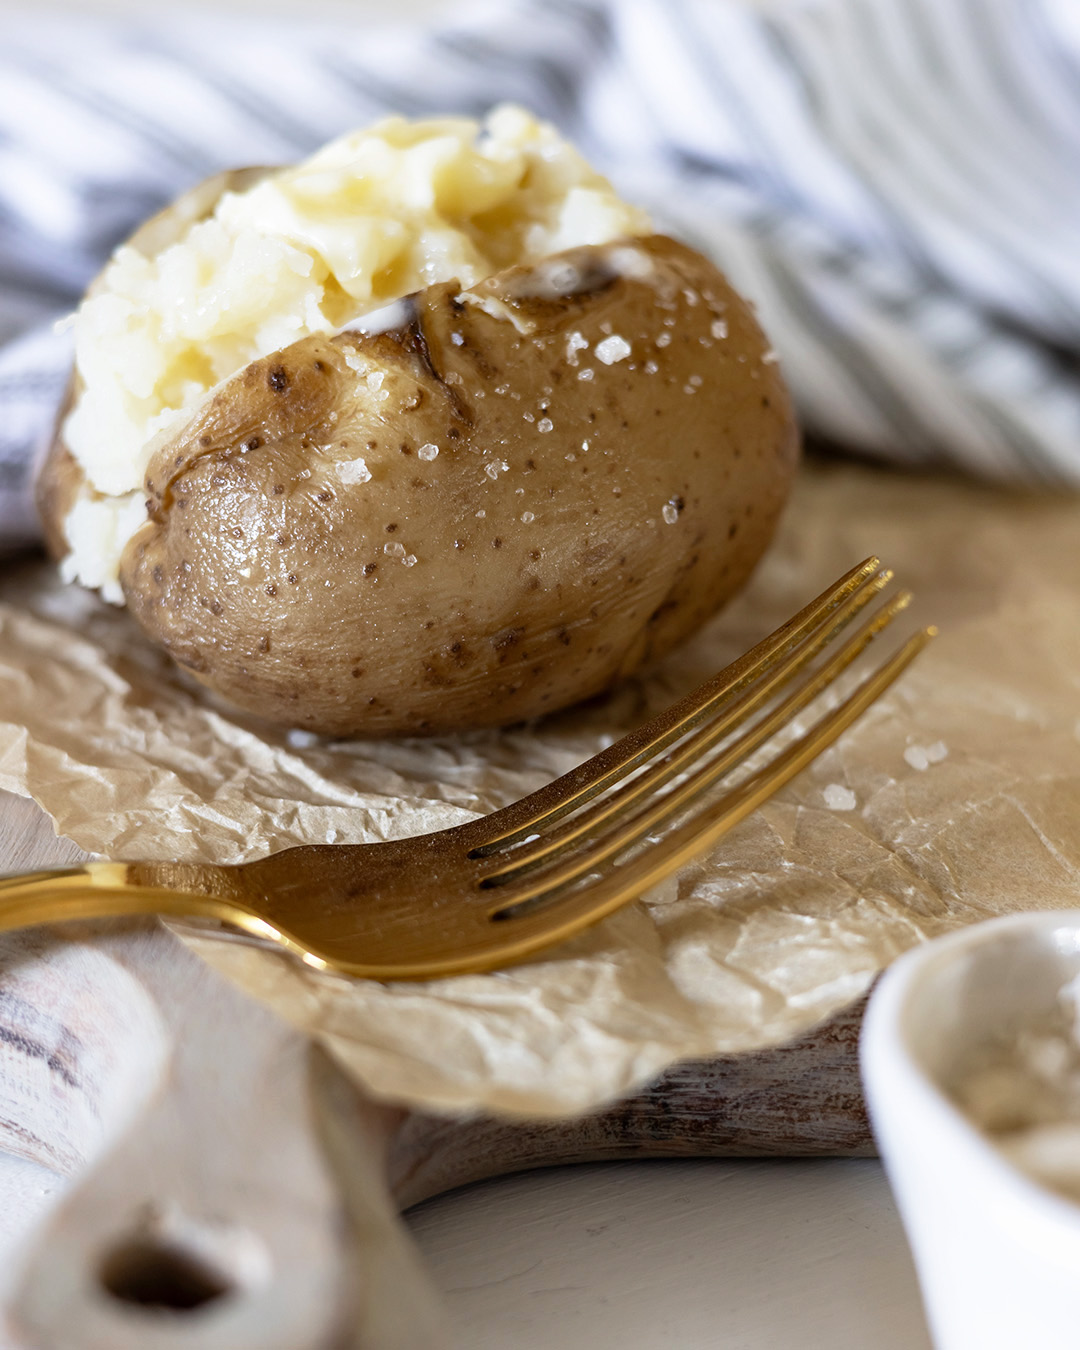 Crock pot baked potato with gold fork and striped towel